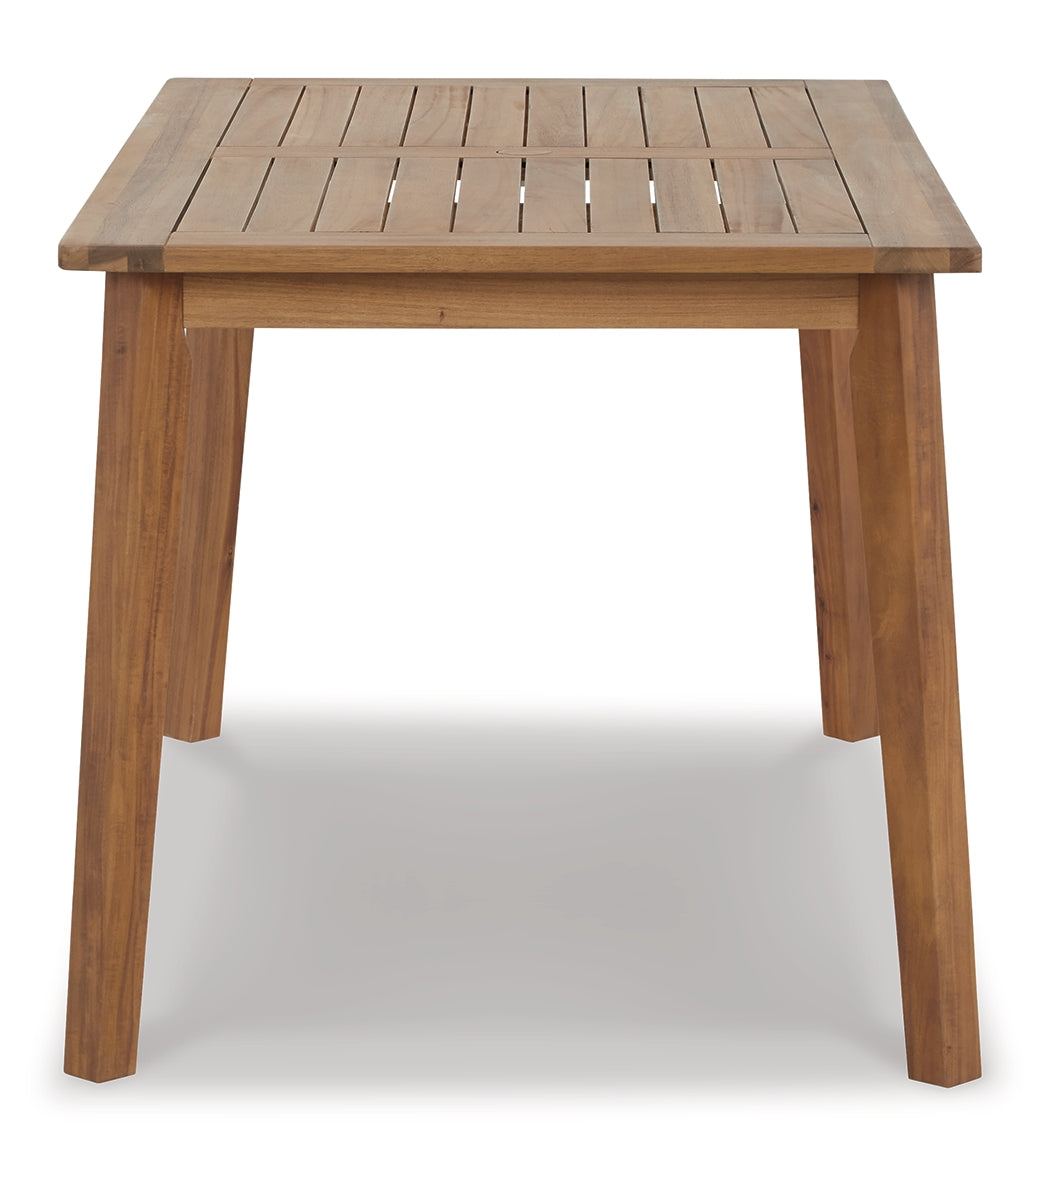 Janiyah Outdoor Dining Table